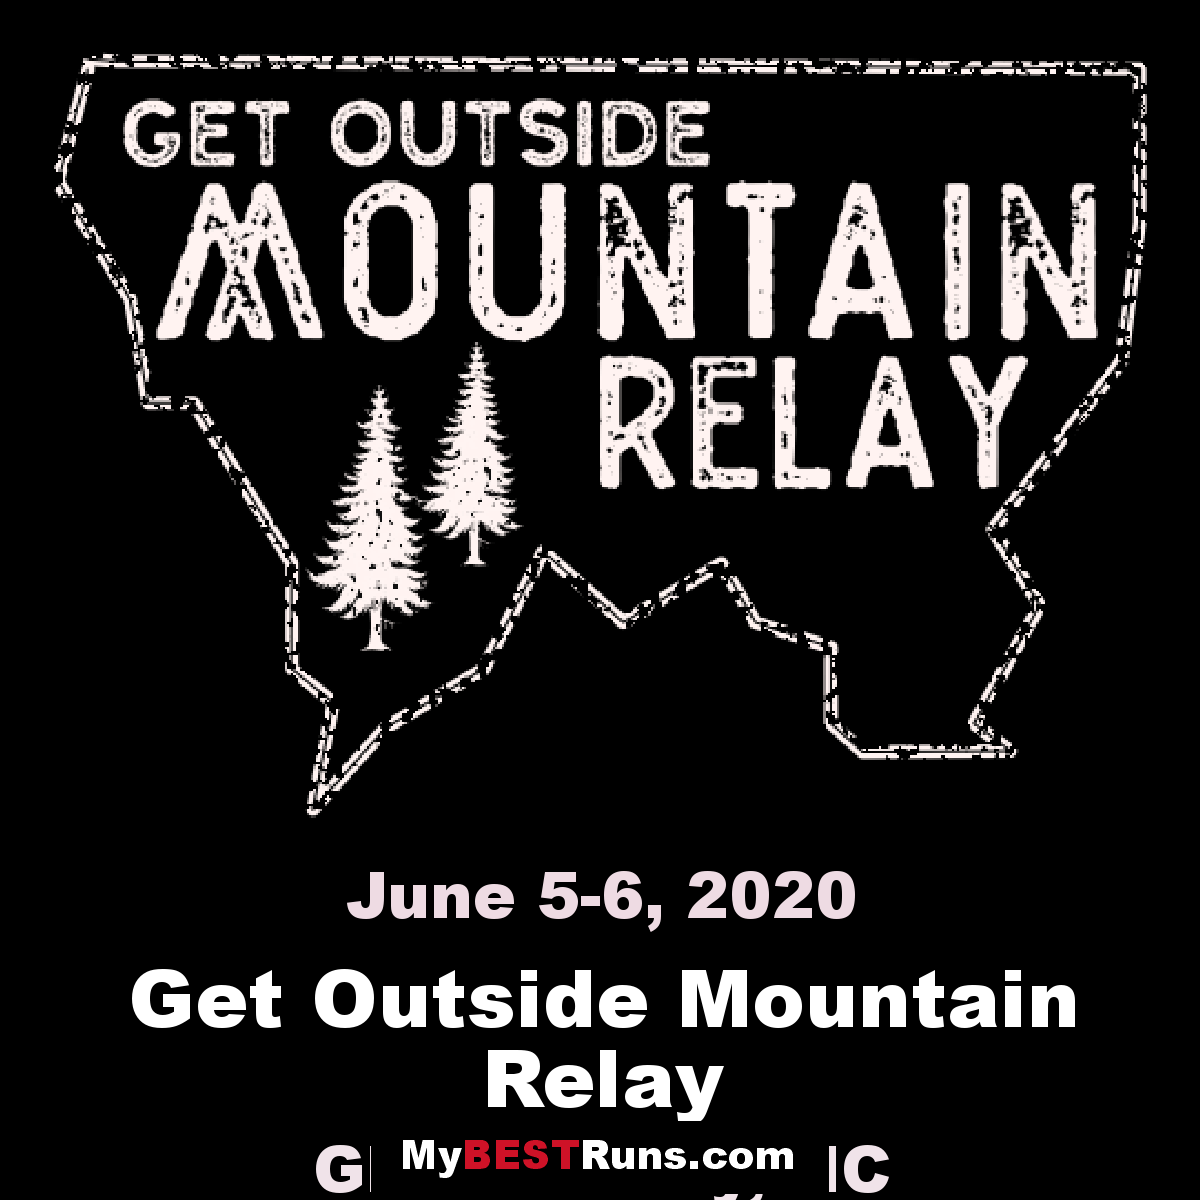 Get Outside Mountain Relay